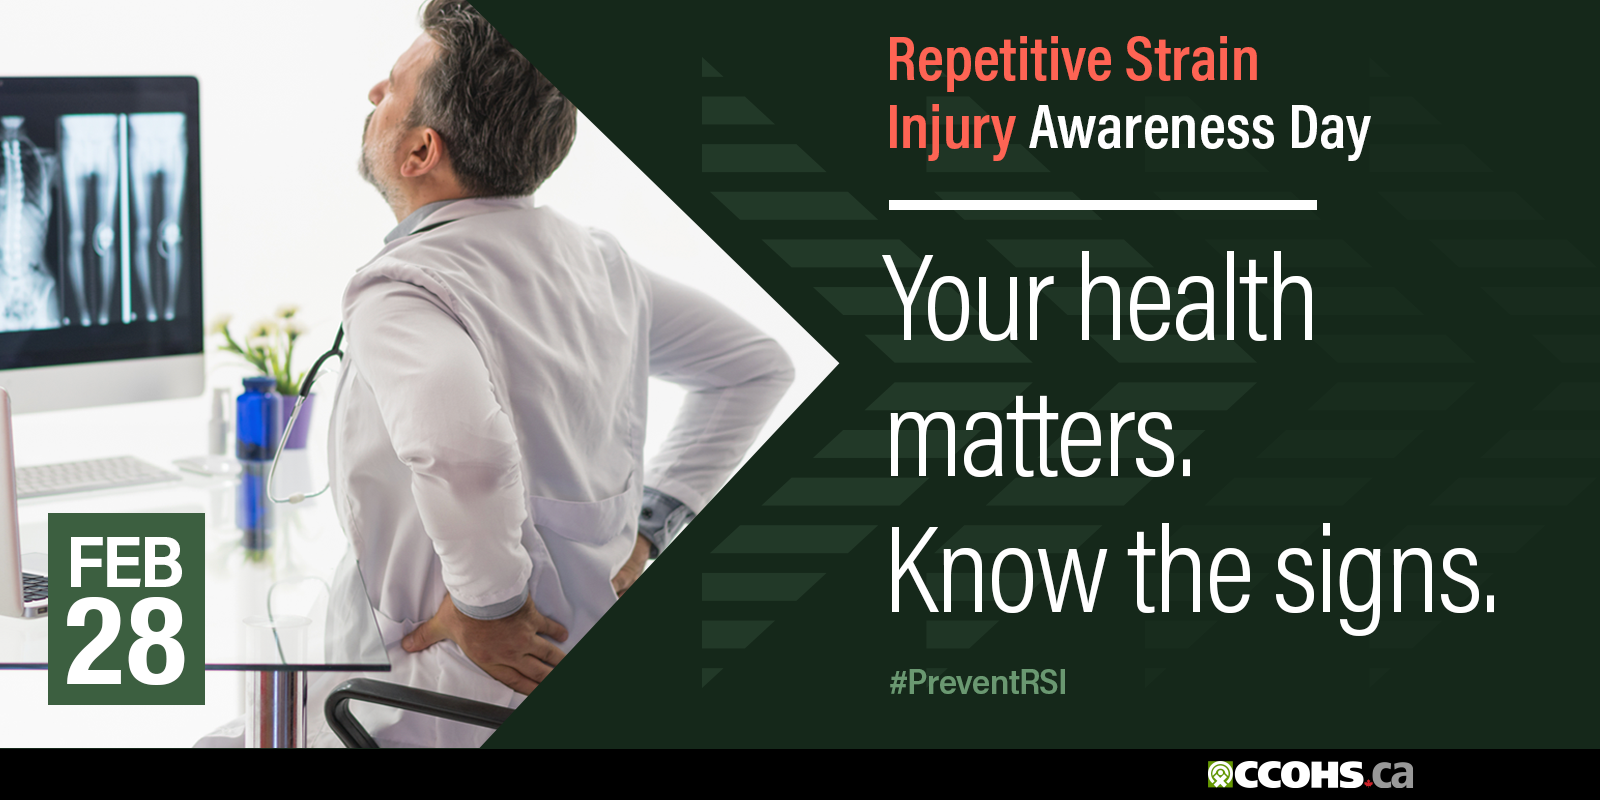 International Repetitive Strain Injury (RSI) Awareness Day. Because your health matters, too.